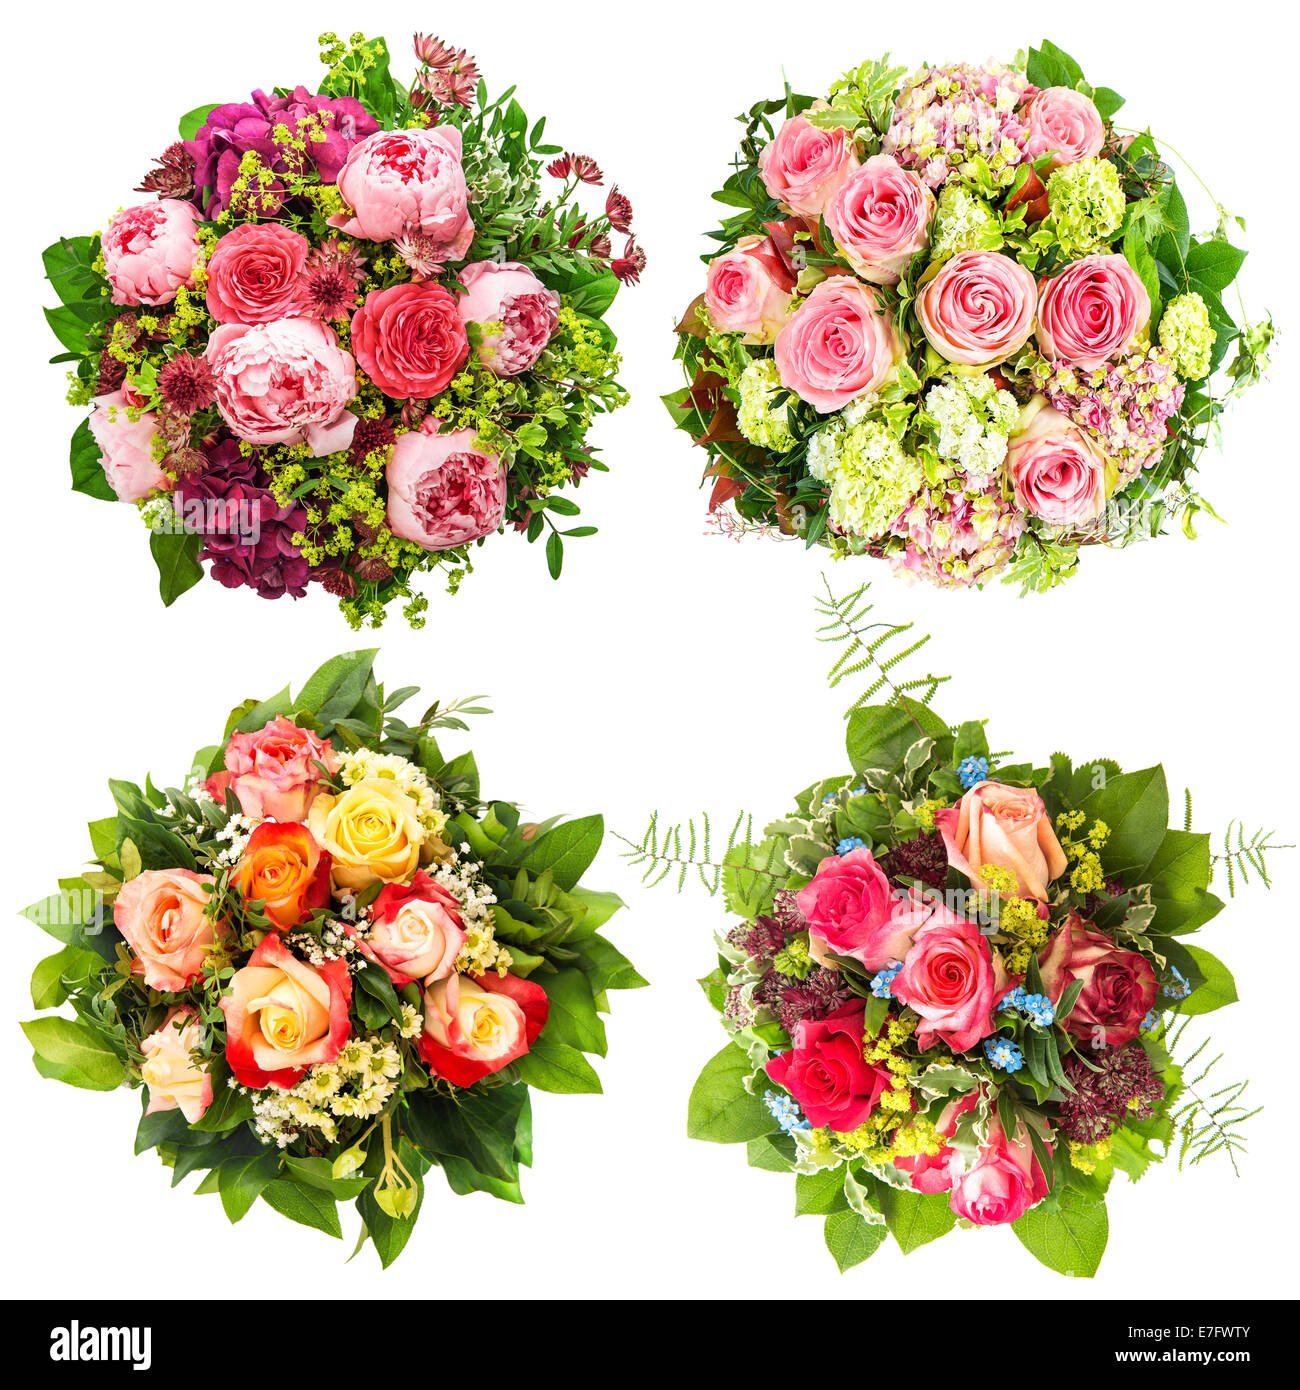 Flowers Bouquet for Birthday, Wedding, Mothers Day, Easter, Holidays and Life Events Stock Photo